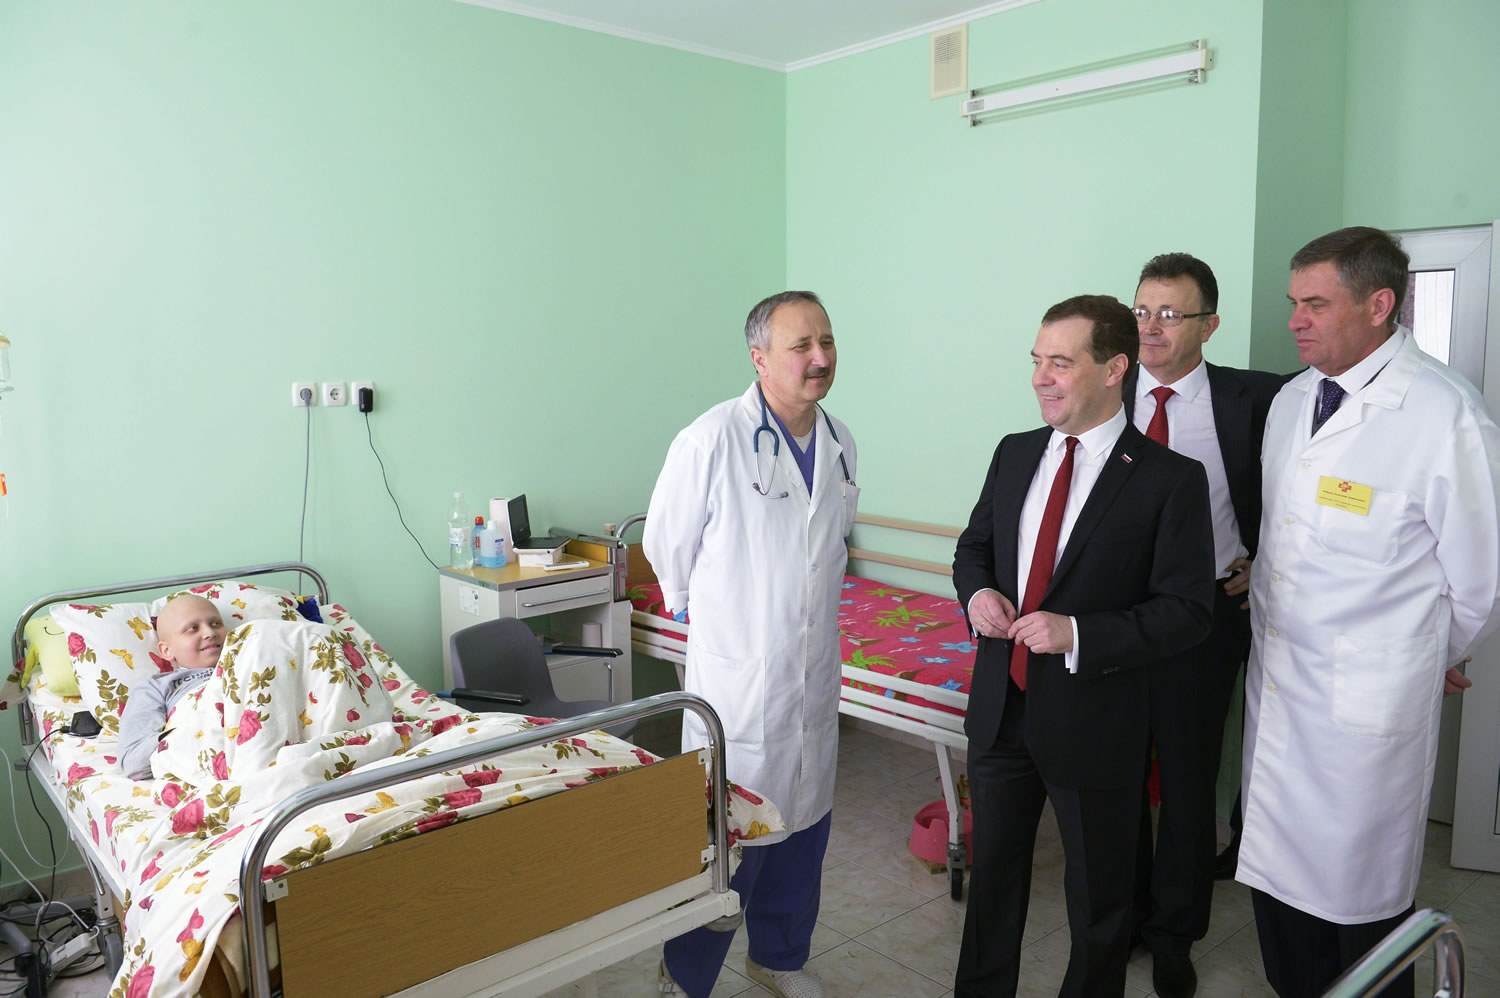 Russian Prime Minister Dmitry Medvedev, third right, smiles while visiting a city children's hospital in Simferopol, Crimea, on Monday.